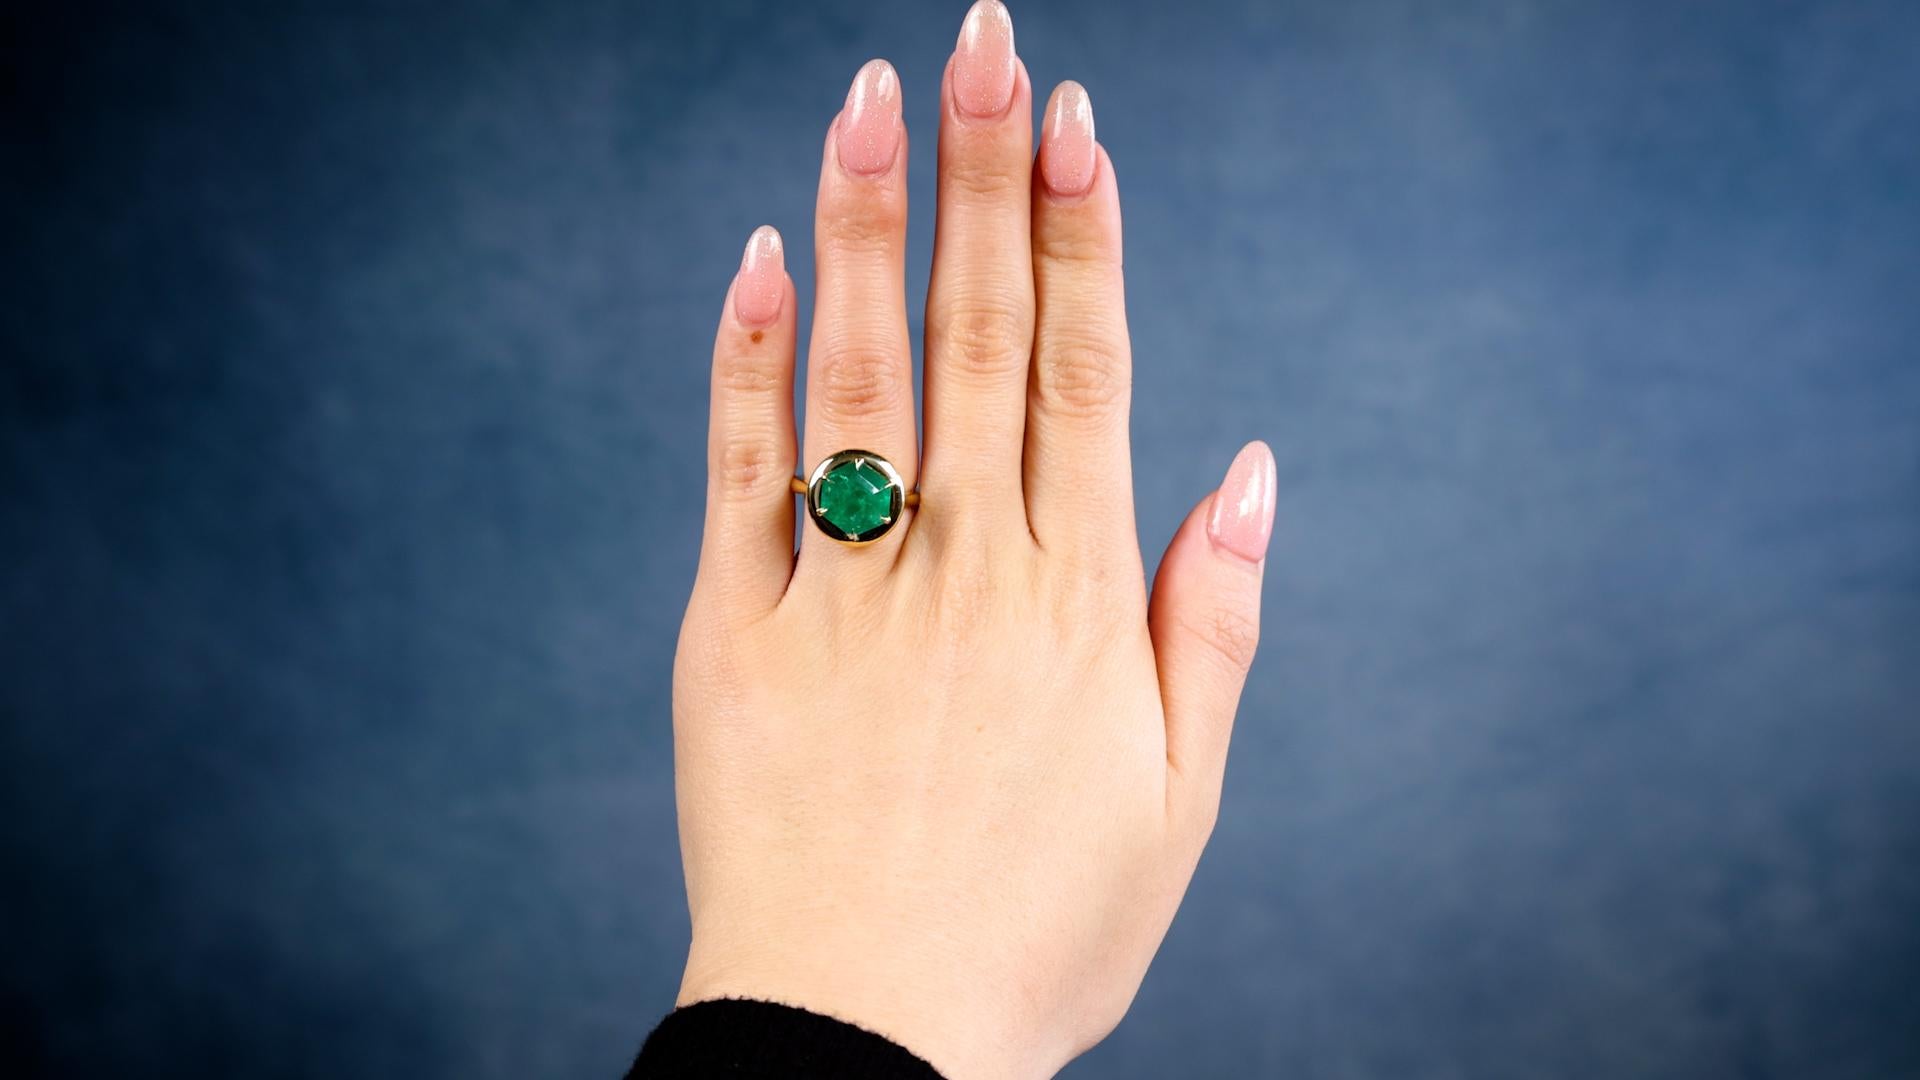 One Emerald 18k Yellow Gold Ring. Featuring one hexagonal step cut emerald of 3.94 carats. Crafted in 18 karat yellow gold. Circa 2023. The ring is a size 6 ½ and may be resized.

About this Item: Prepare to make a statement with this extraordinary